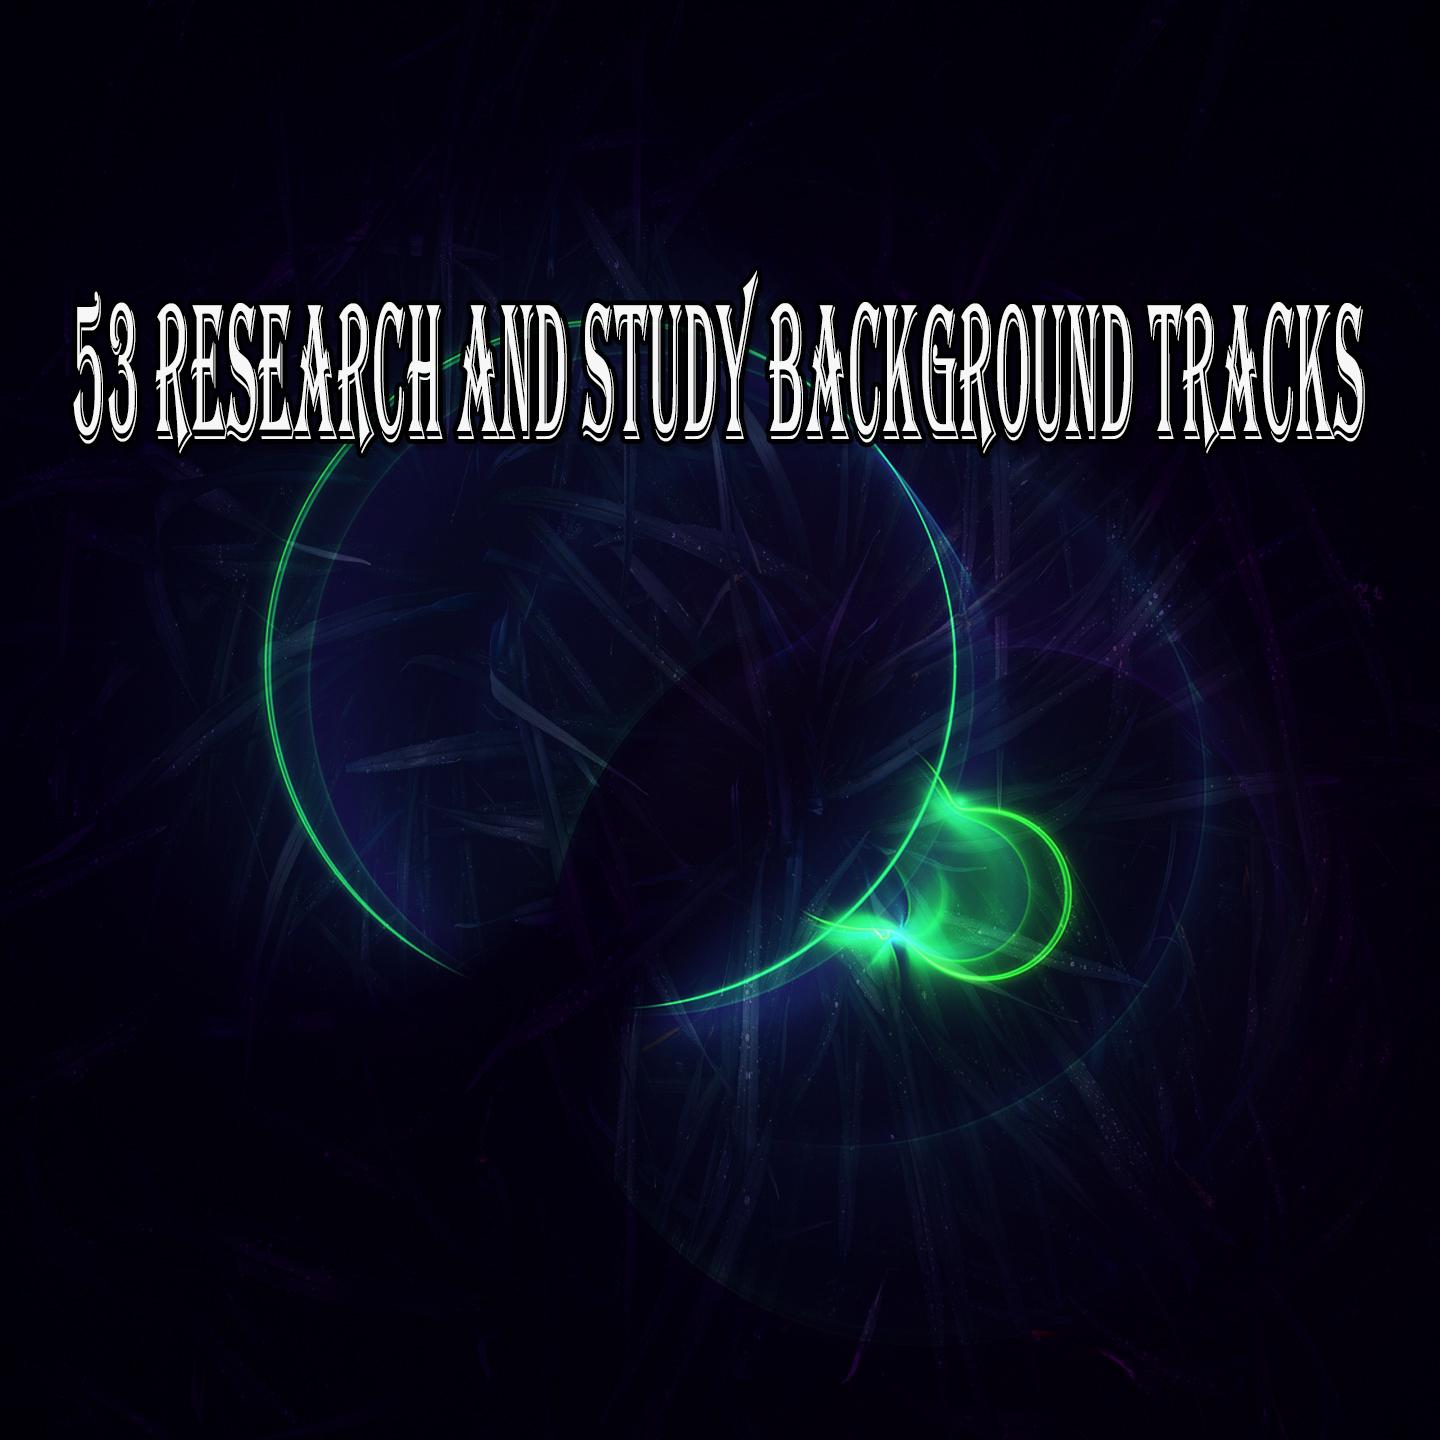 53 Research and Study Background Tracks